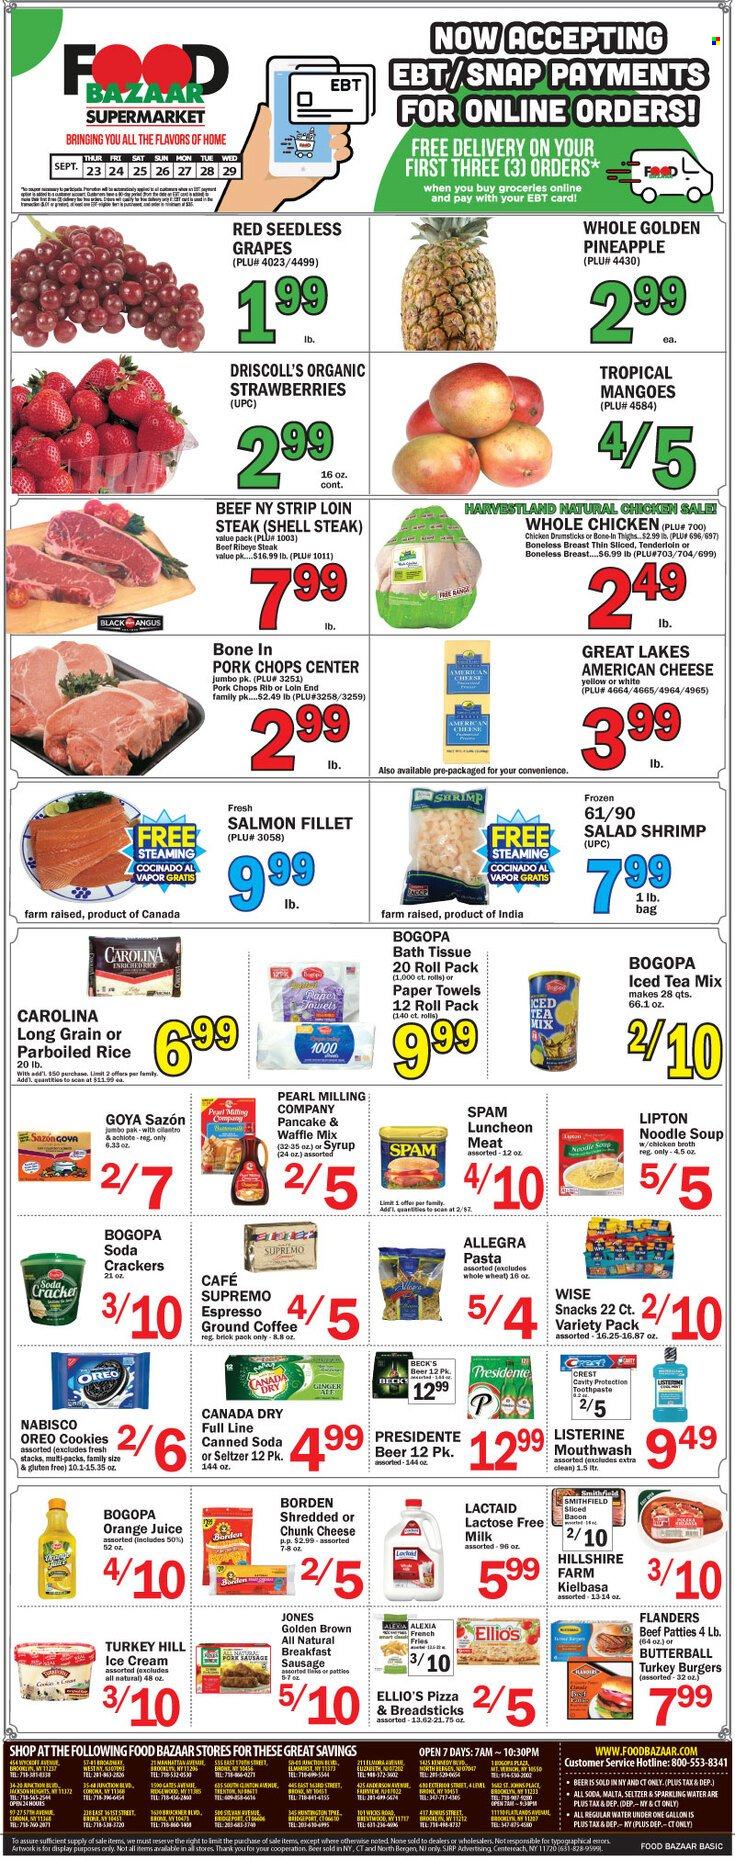 thumbnail - Food Bazaar Flyer - 09/23/2021 - 09/29/2021 - Sales products - seedless grapes, salad, grapes, strawberries, pineapple, salmon, salmon fillet, shrimps, pizza, soup, hamburger, pasta, pancakes, noodles cup, noodles, Butterball, Hillshire Farm, sausage, kielbasa, Spam, lunch meat, american cheese, Lactaid, chunk cheese, Oreo, milk, lactose free milk, ice cream, cookies, snack, crackers, 7 Days, bread sticks, Goya, rice, parboiled rice, Canada Dry, orange juice, juice, Lipton, ice tea, seltzer water, soda, sparkling water, coffee, ground coffee, beer, Beck's, whole chicken, chicken drumsticks, beef meat, beef steak, steak, sirloin steak, ribeye steak, turkey burger, pork chops, pork meat. Page 1.